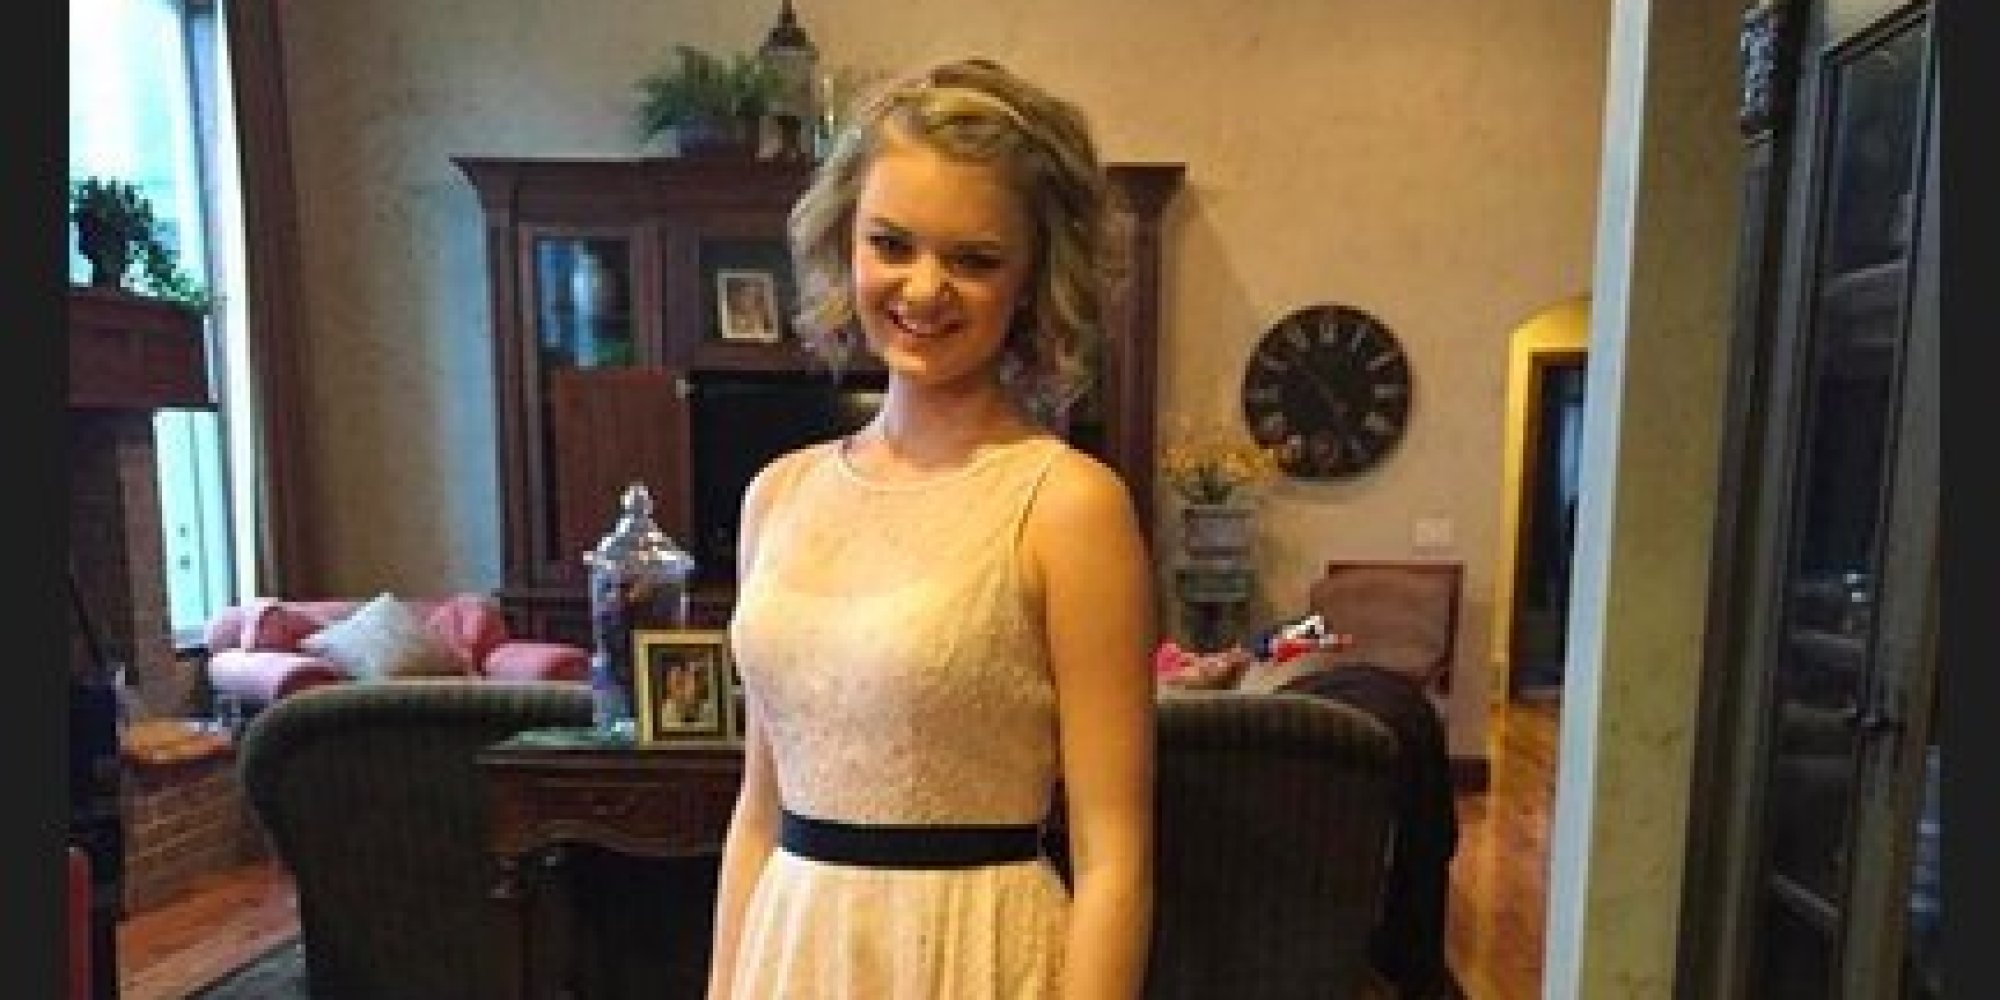 Teen Asked To Cover Up Partially Exposed Shoulders At High School Dance 